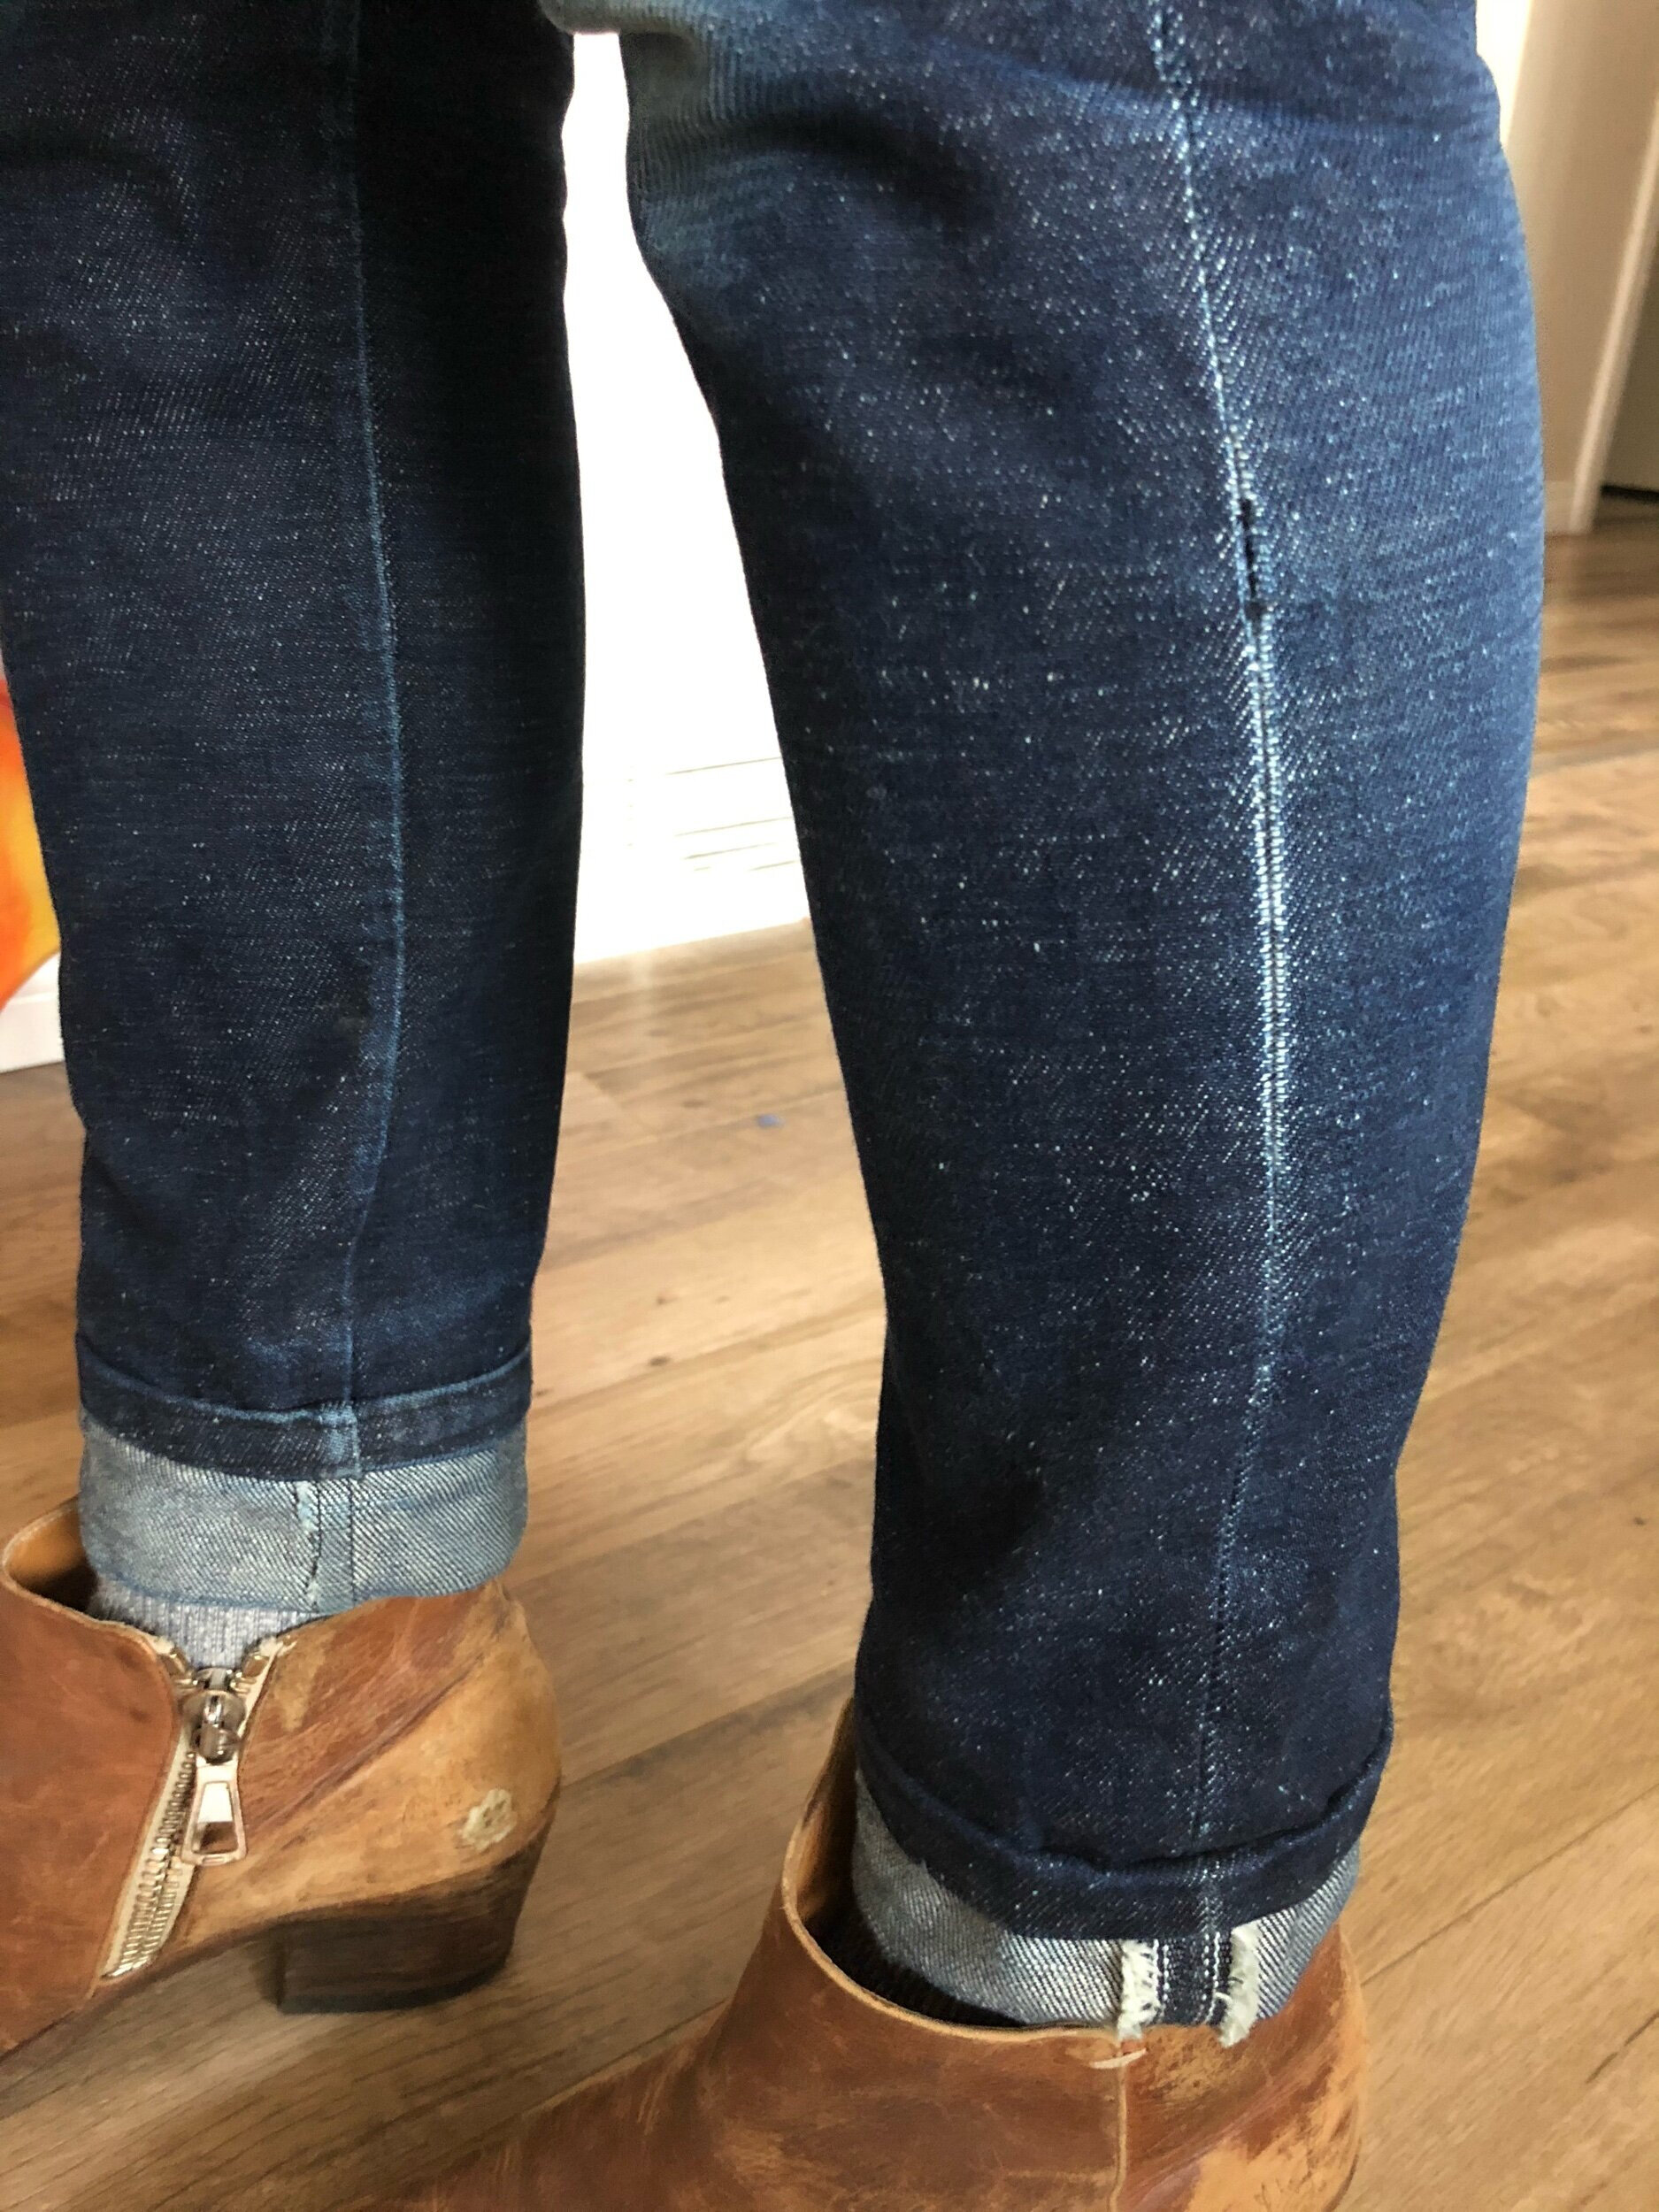 former popped stitches still visible due to jeans aging